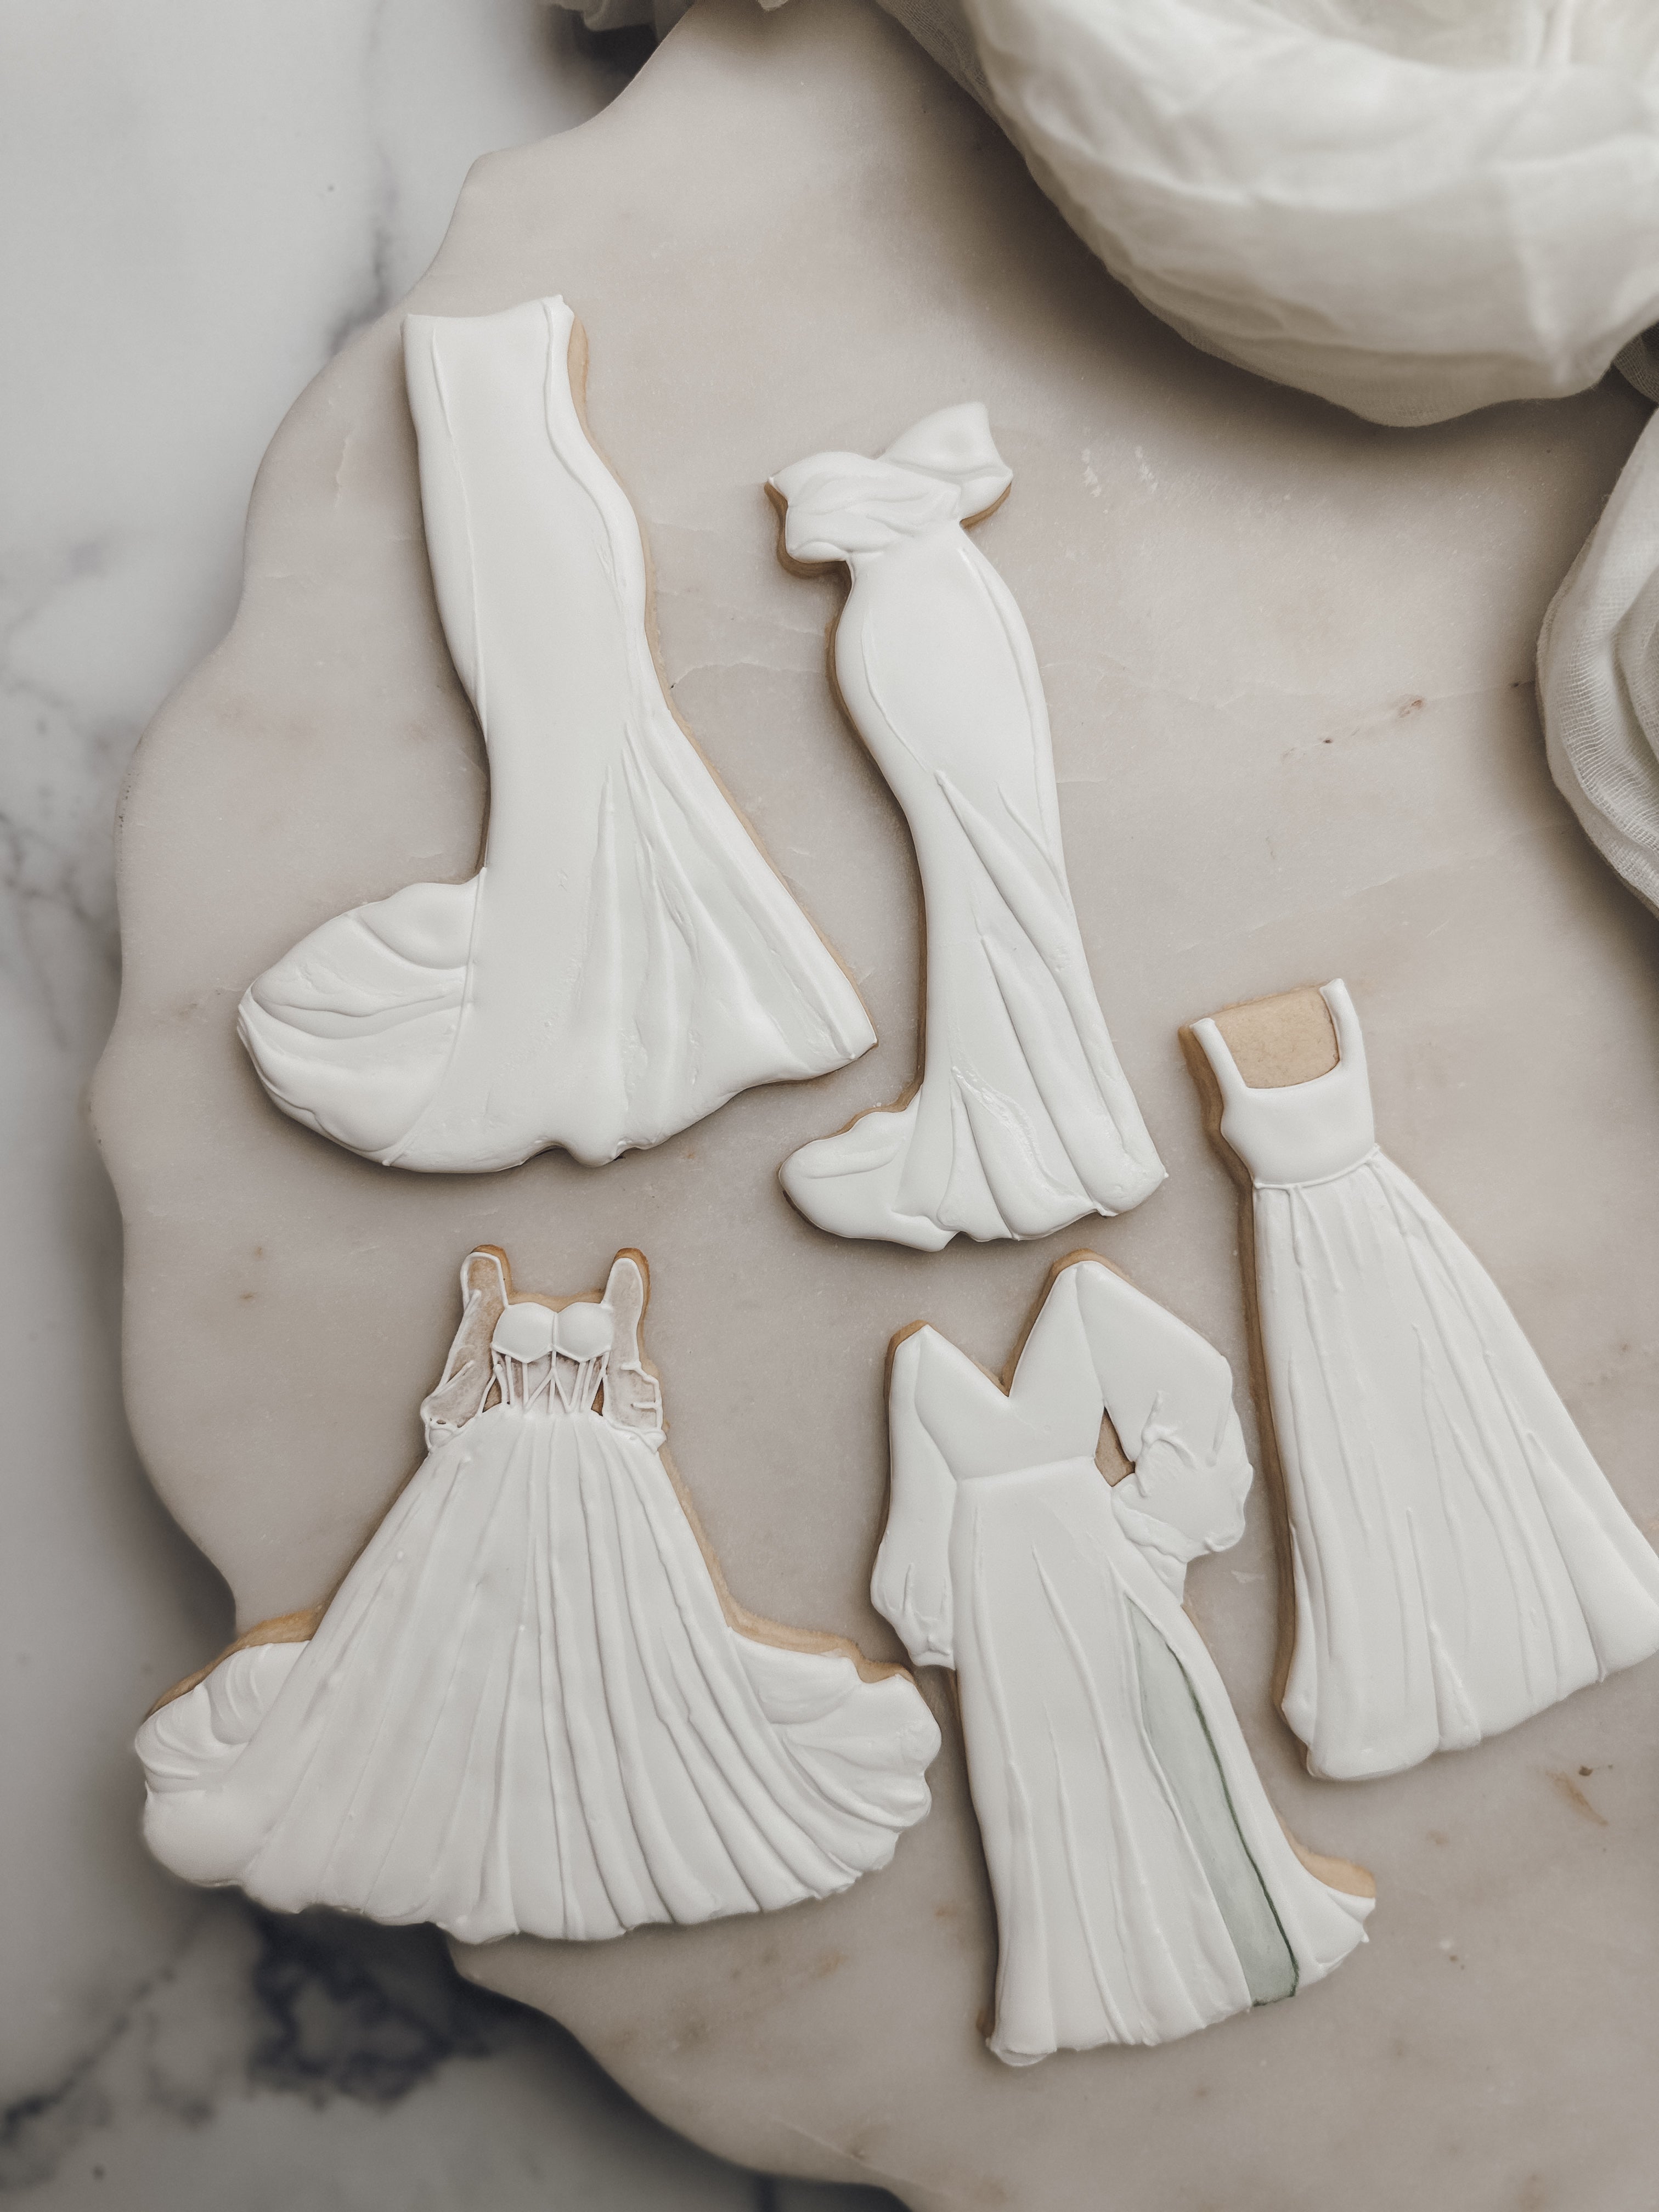 Bridal Gown Collection Cookie Cutters